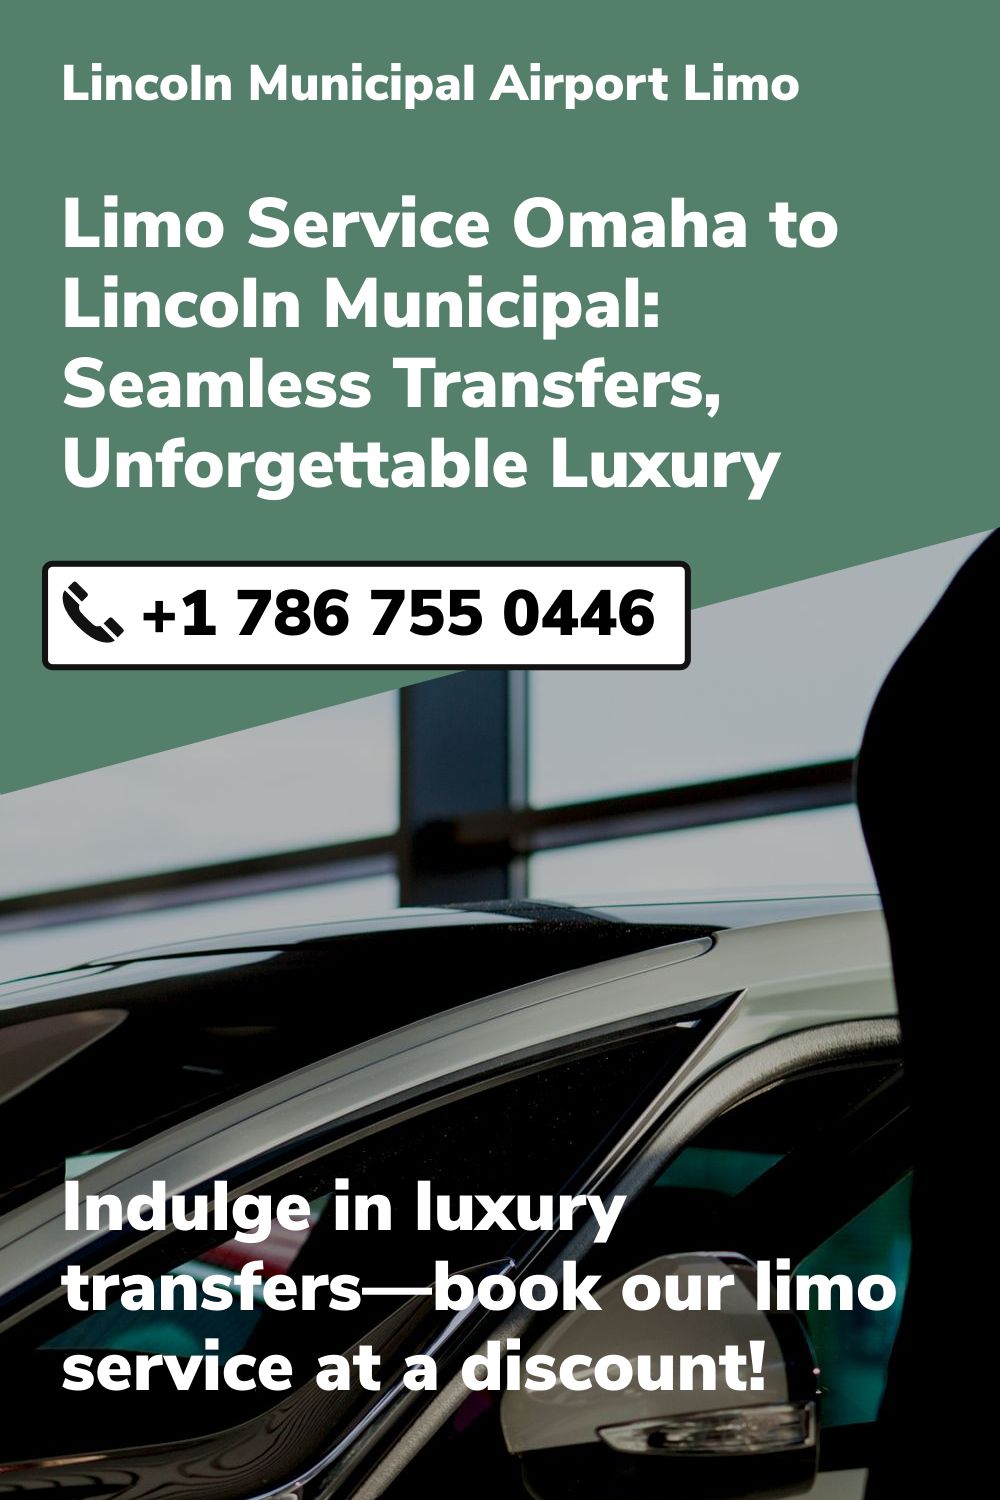 Lincoln Municipal Airport Limo